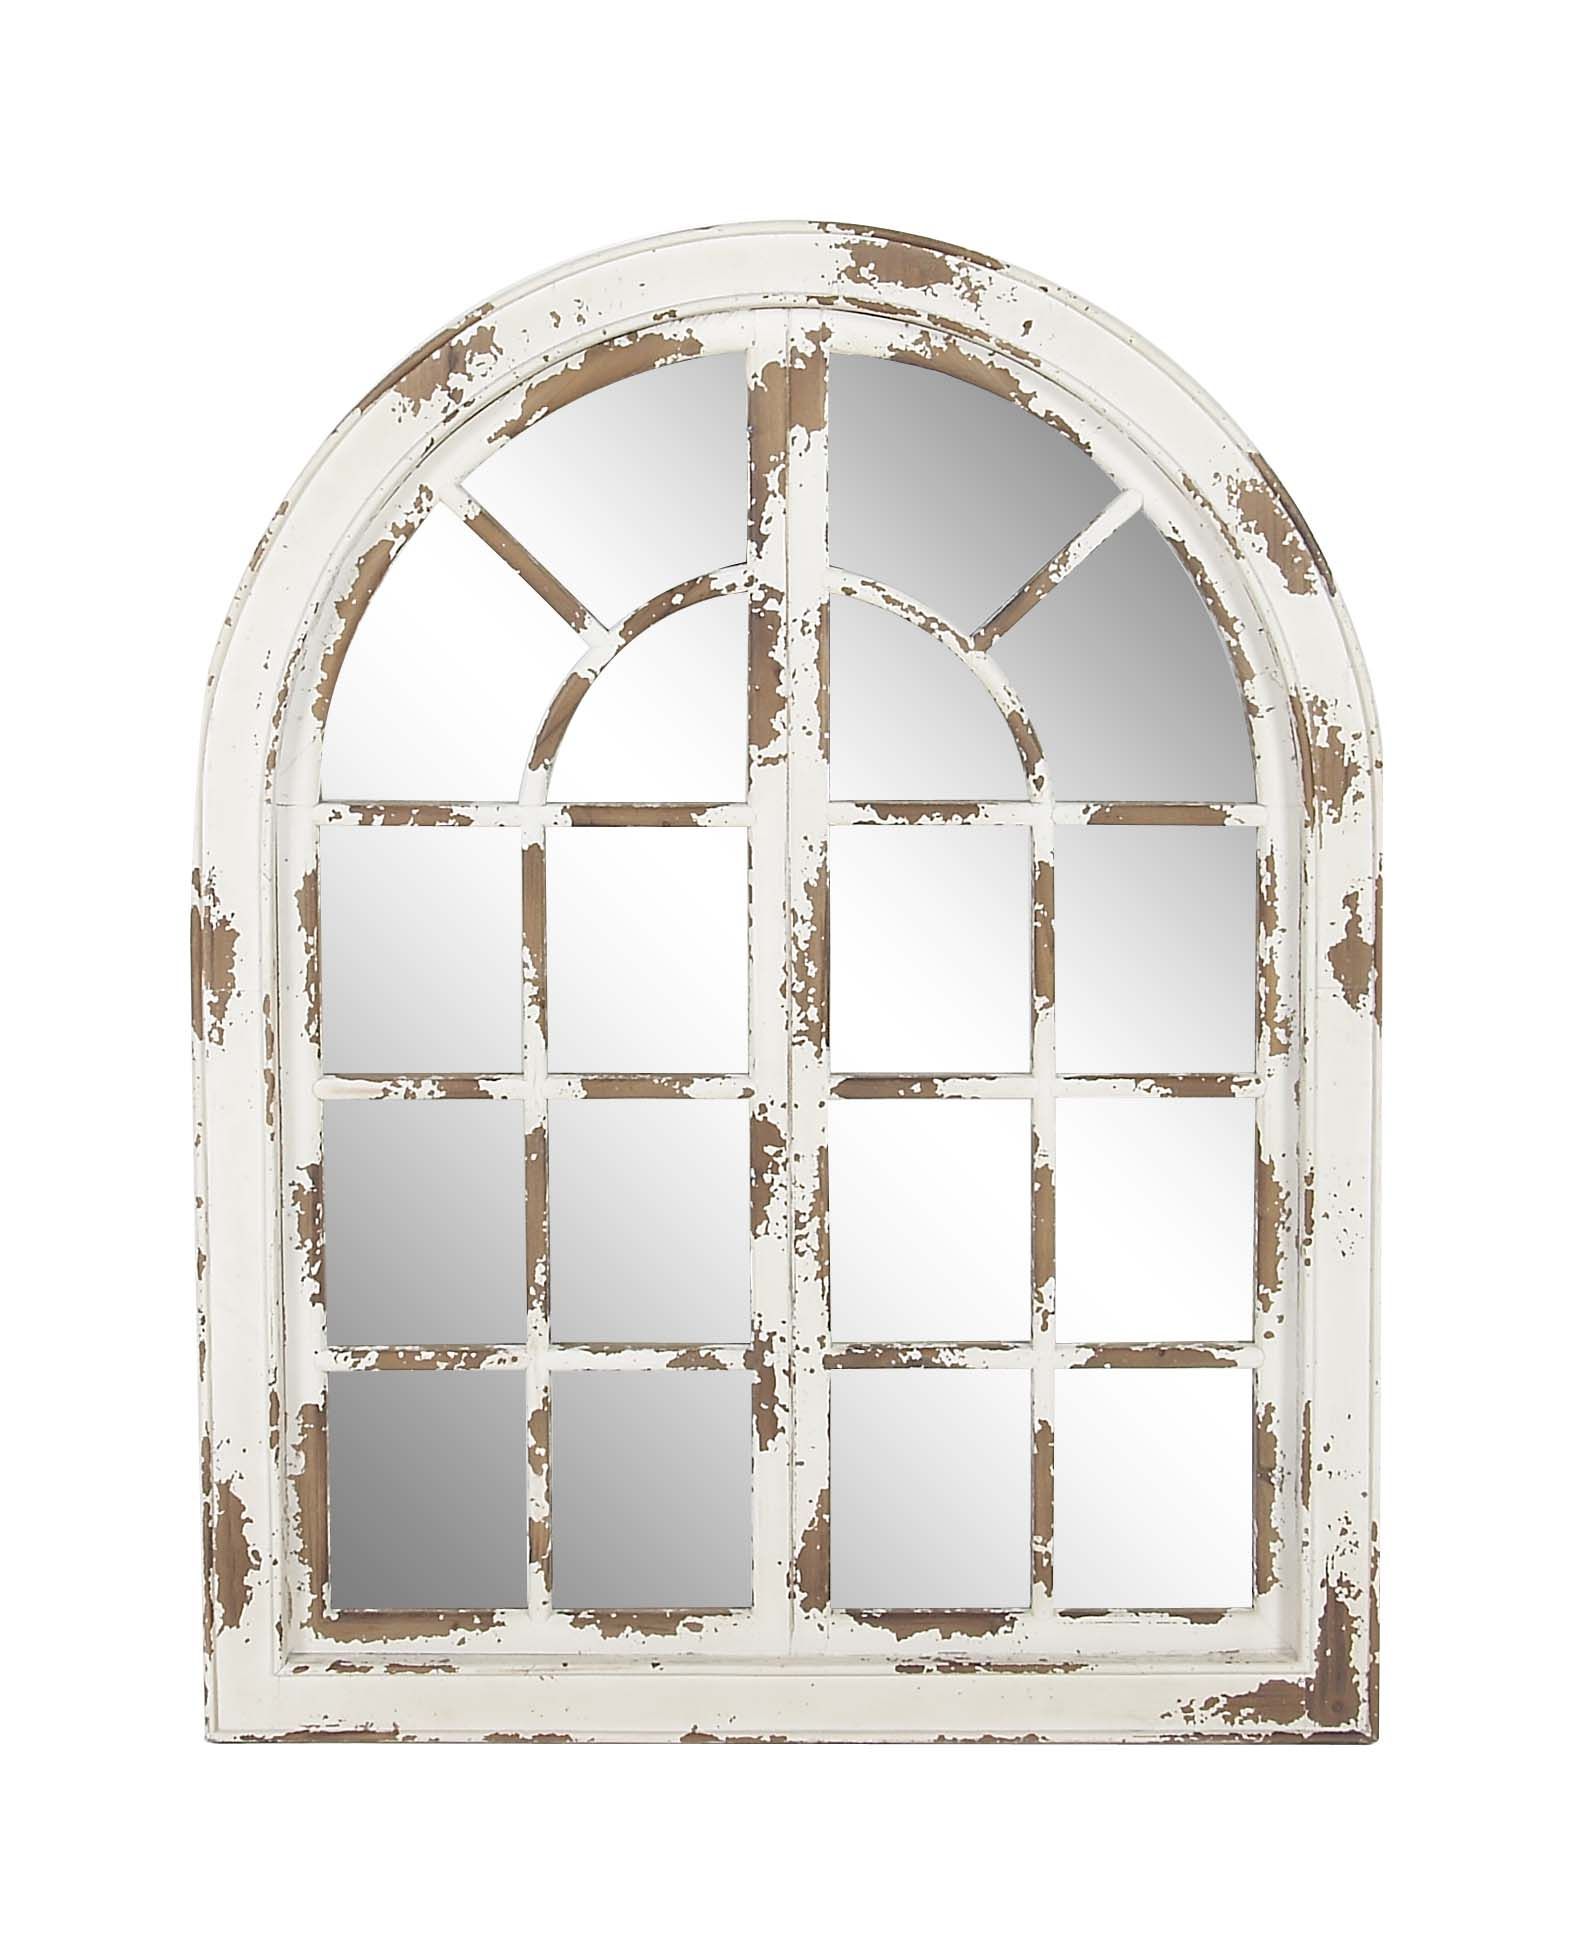 Decmode Traditional Wooden Whitewashed Arched Wall Mirror, White In Arch Top Vertical Wall Mirrors (View 11 of 15)